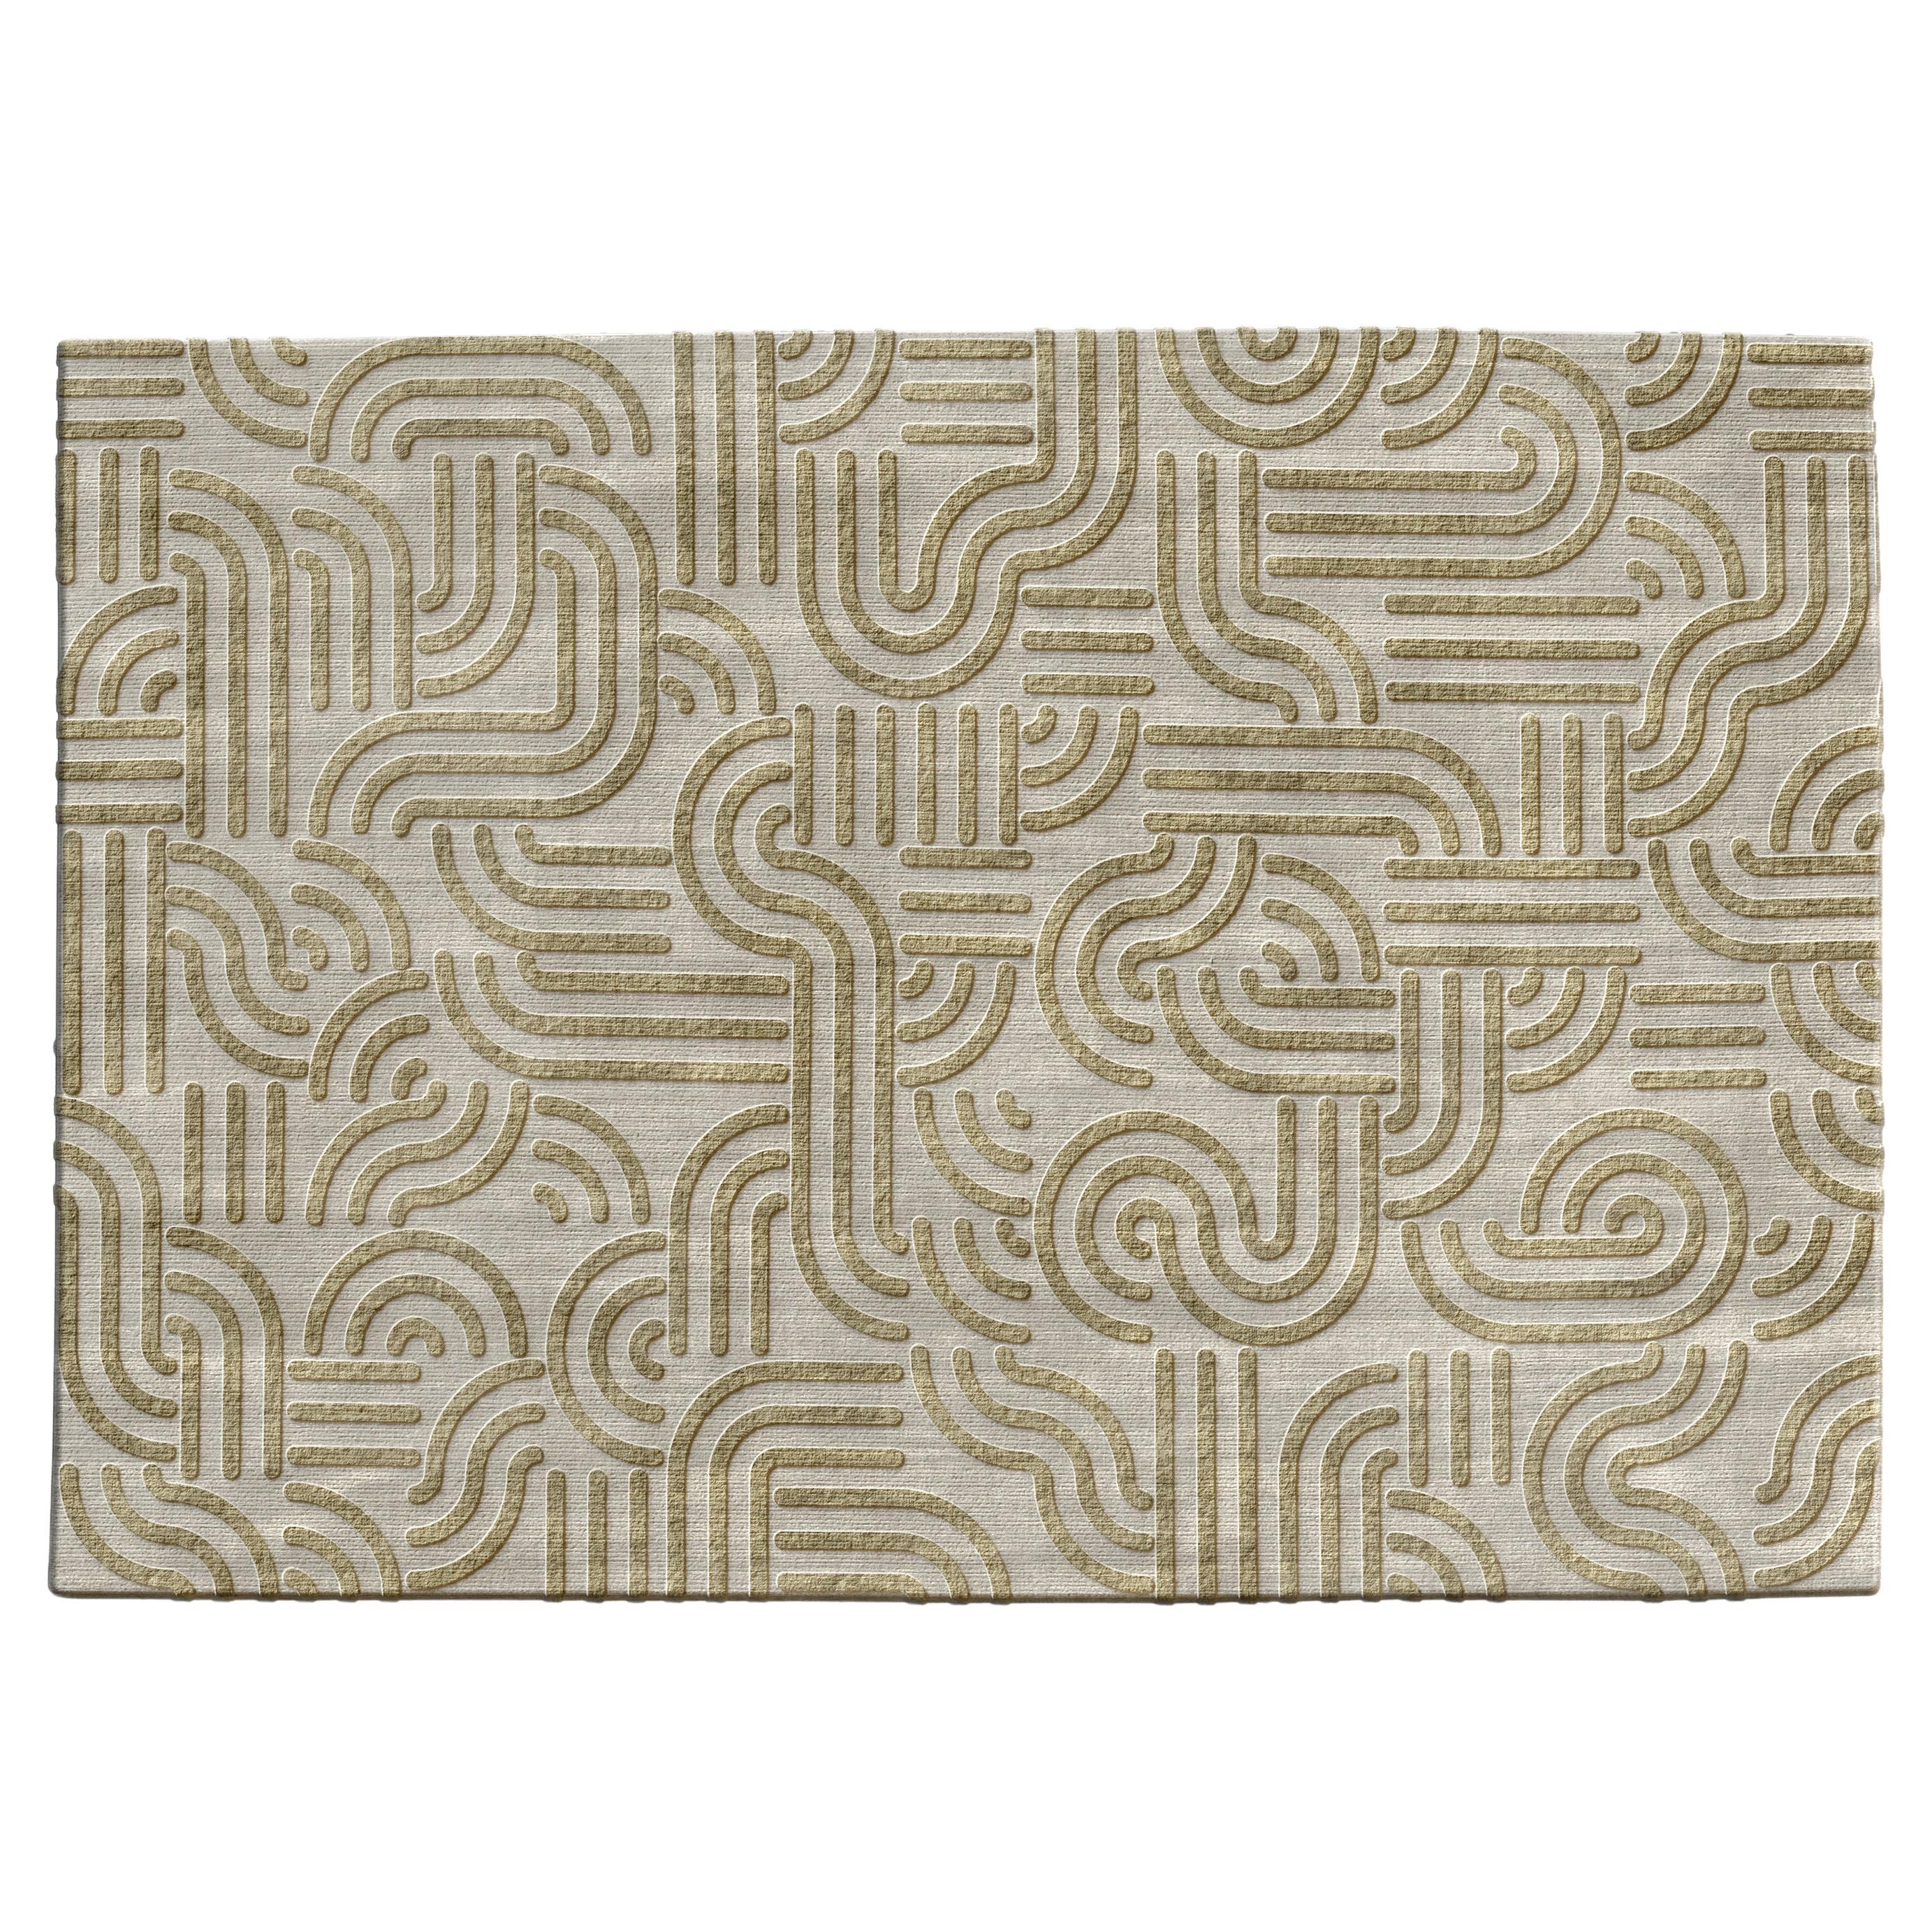 Amador Rug 01 - Limited Edition of 11 / Heirloom Hand Knotted Wool & Silk Yarn